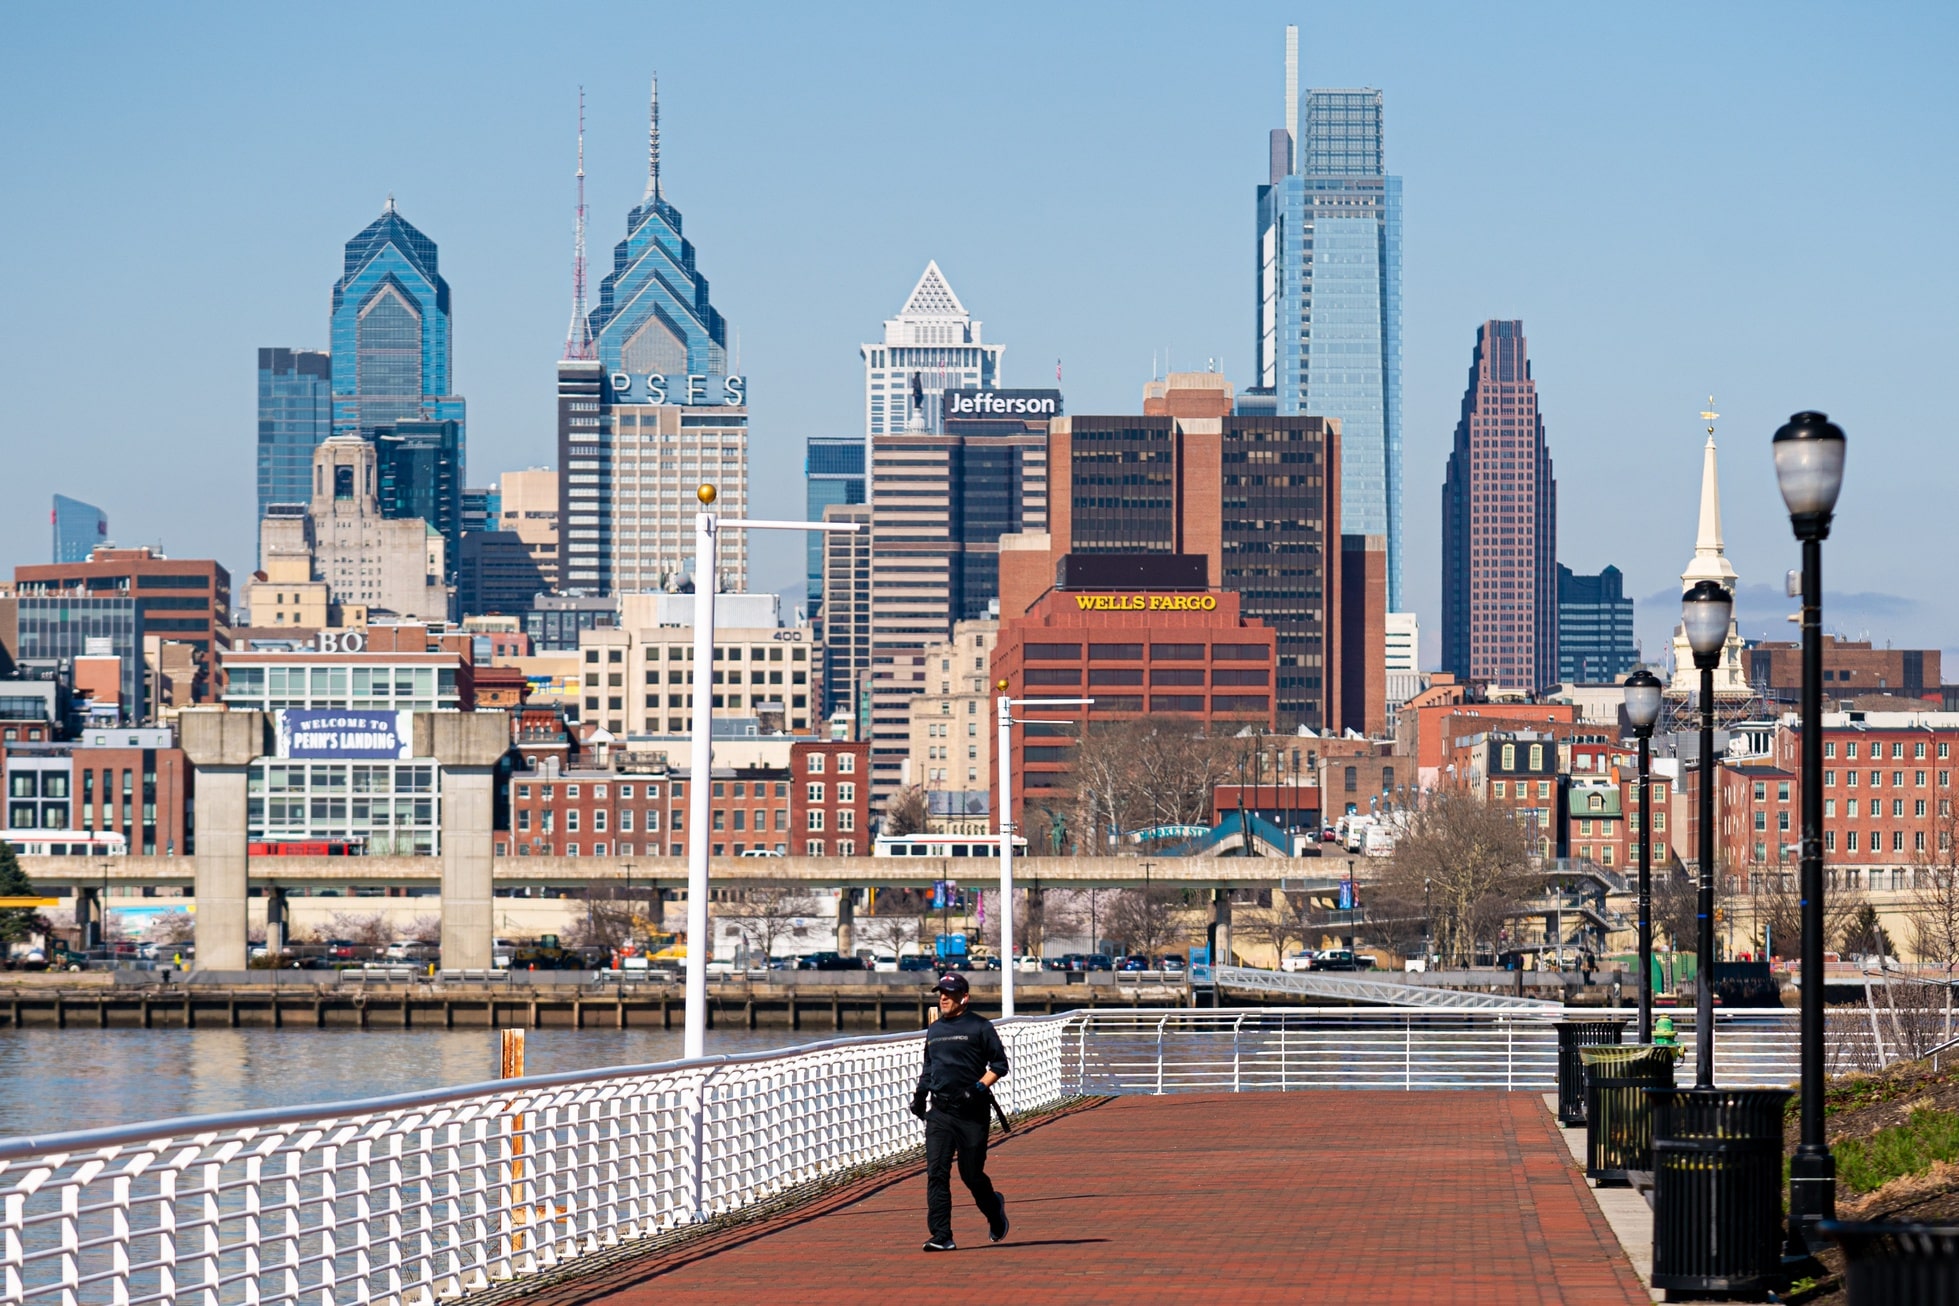 Philly Named Rudest City in the Country, According to Study